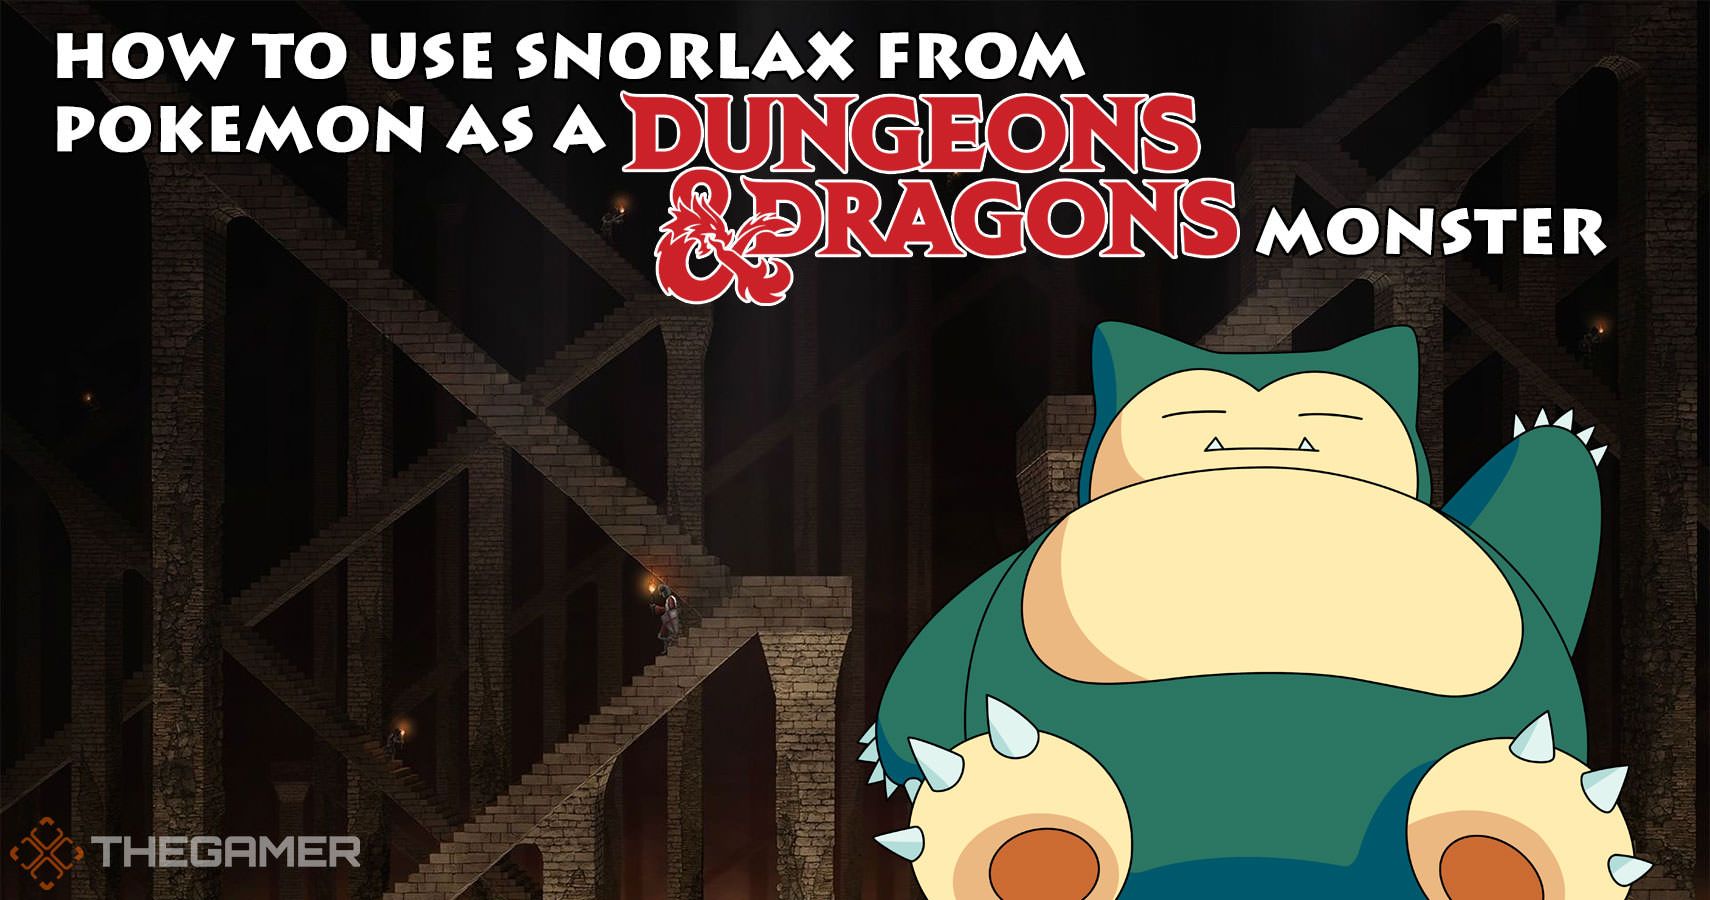 How To Use Snorlax From Pokemon As A D&D Monster